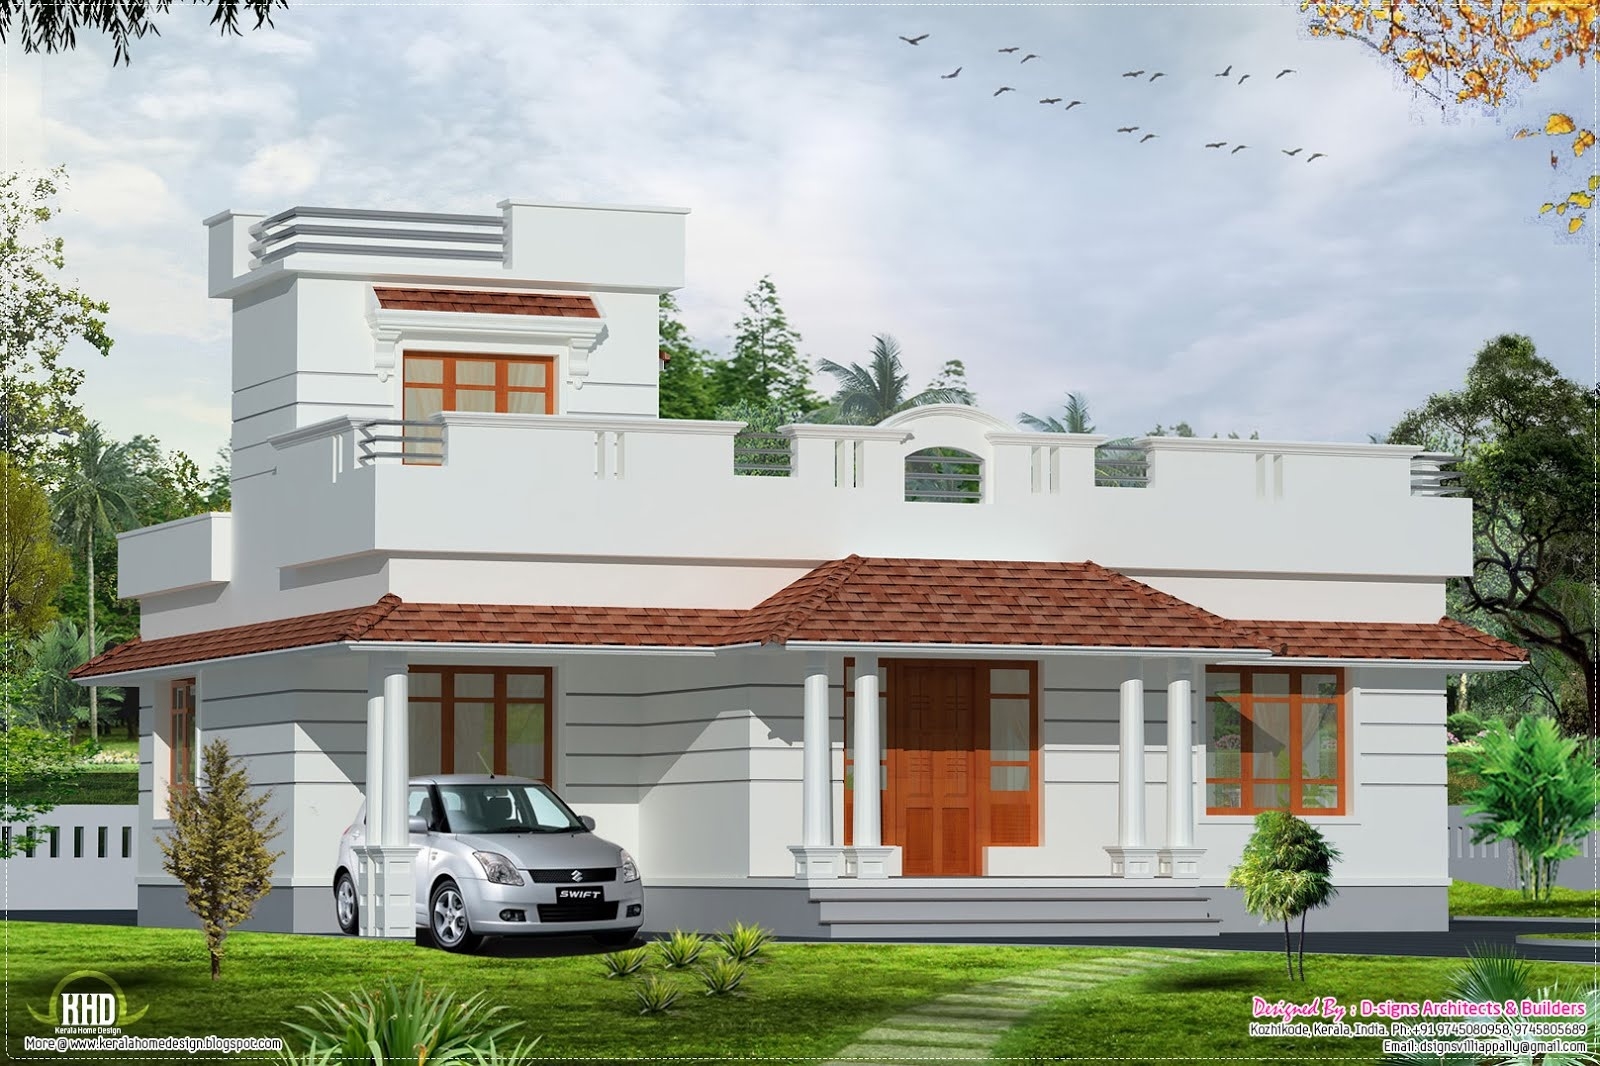 Splendid kerala style budget home in 1200 sq feet kerala home design and floor intended for 1000sq feet kerala home disign photos